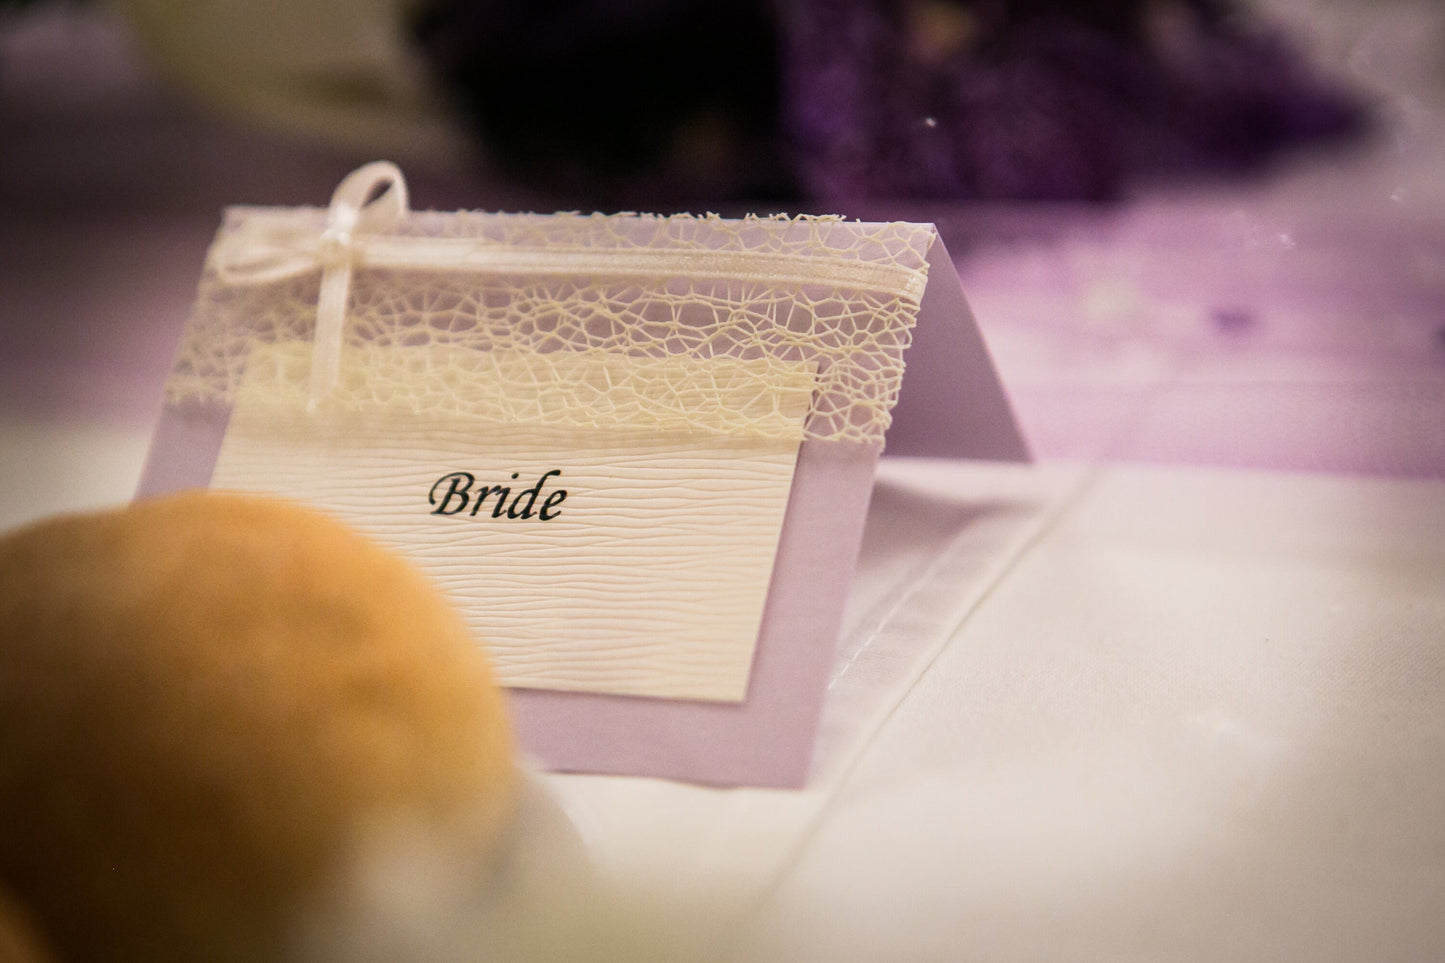 Purple Place card for weddings and special occassions